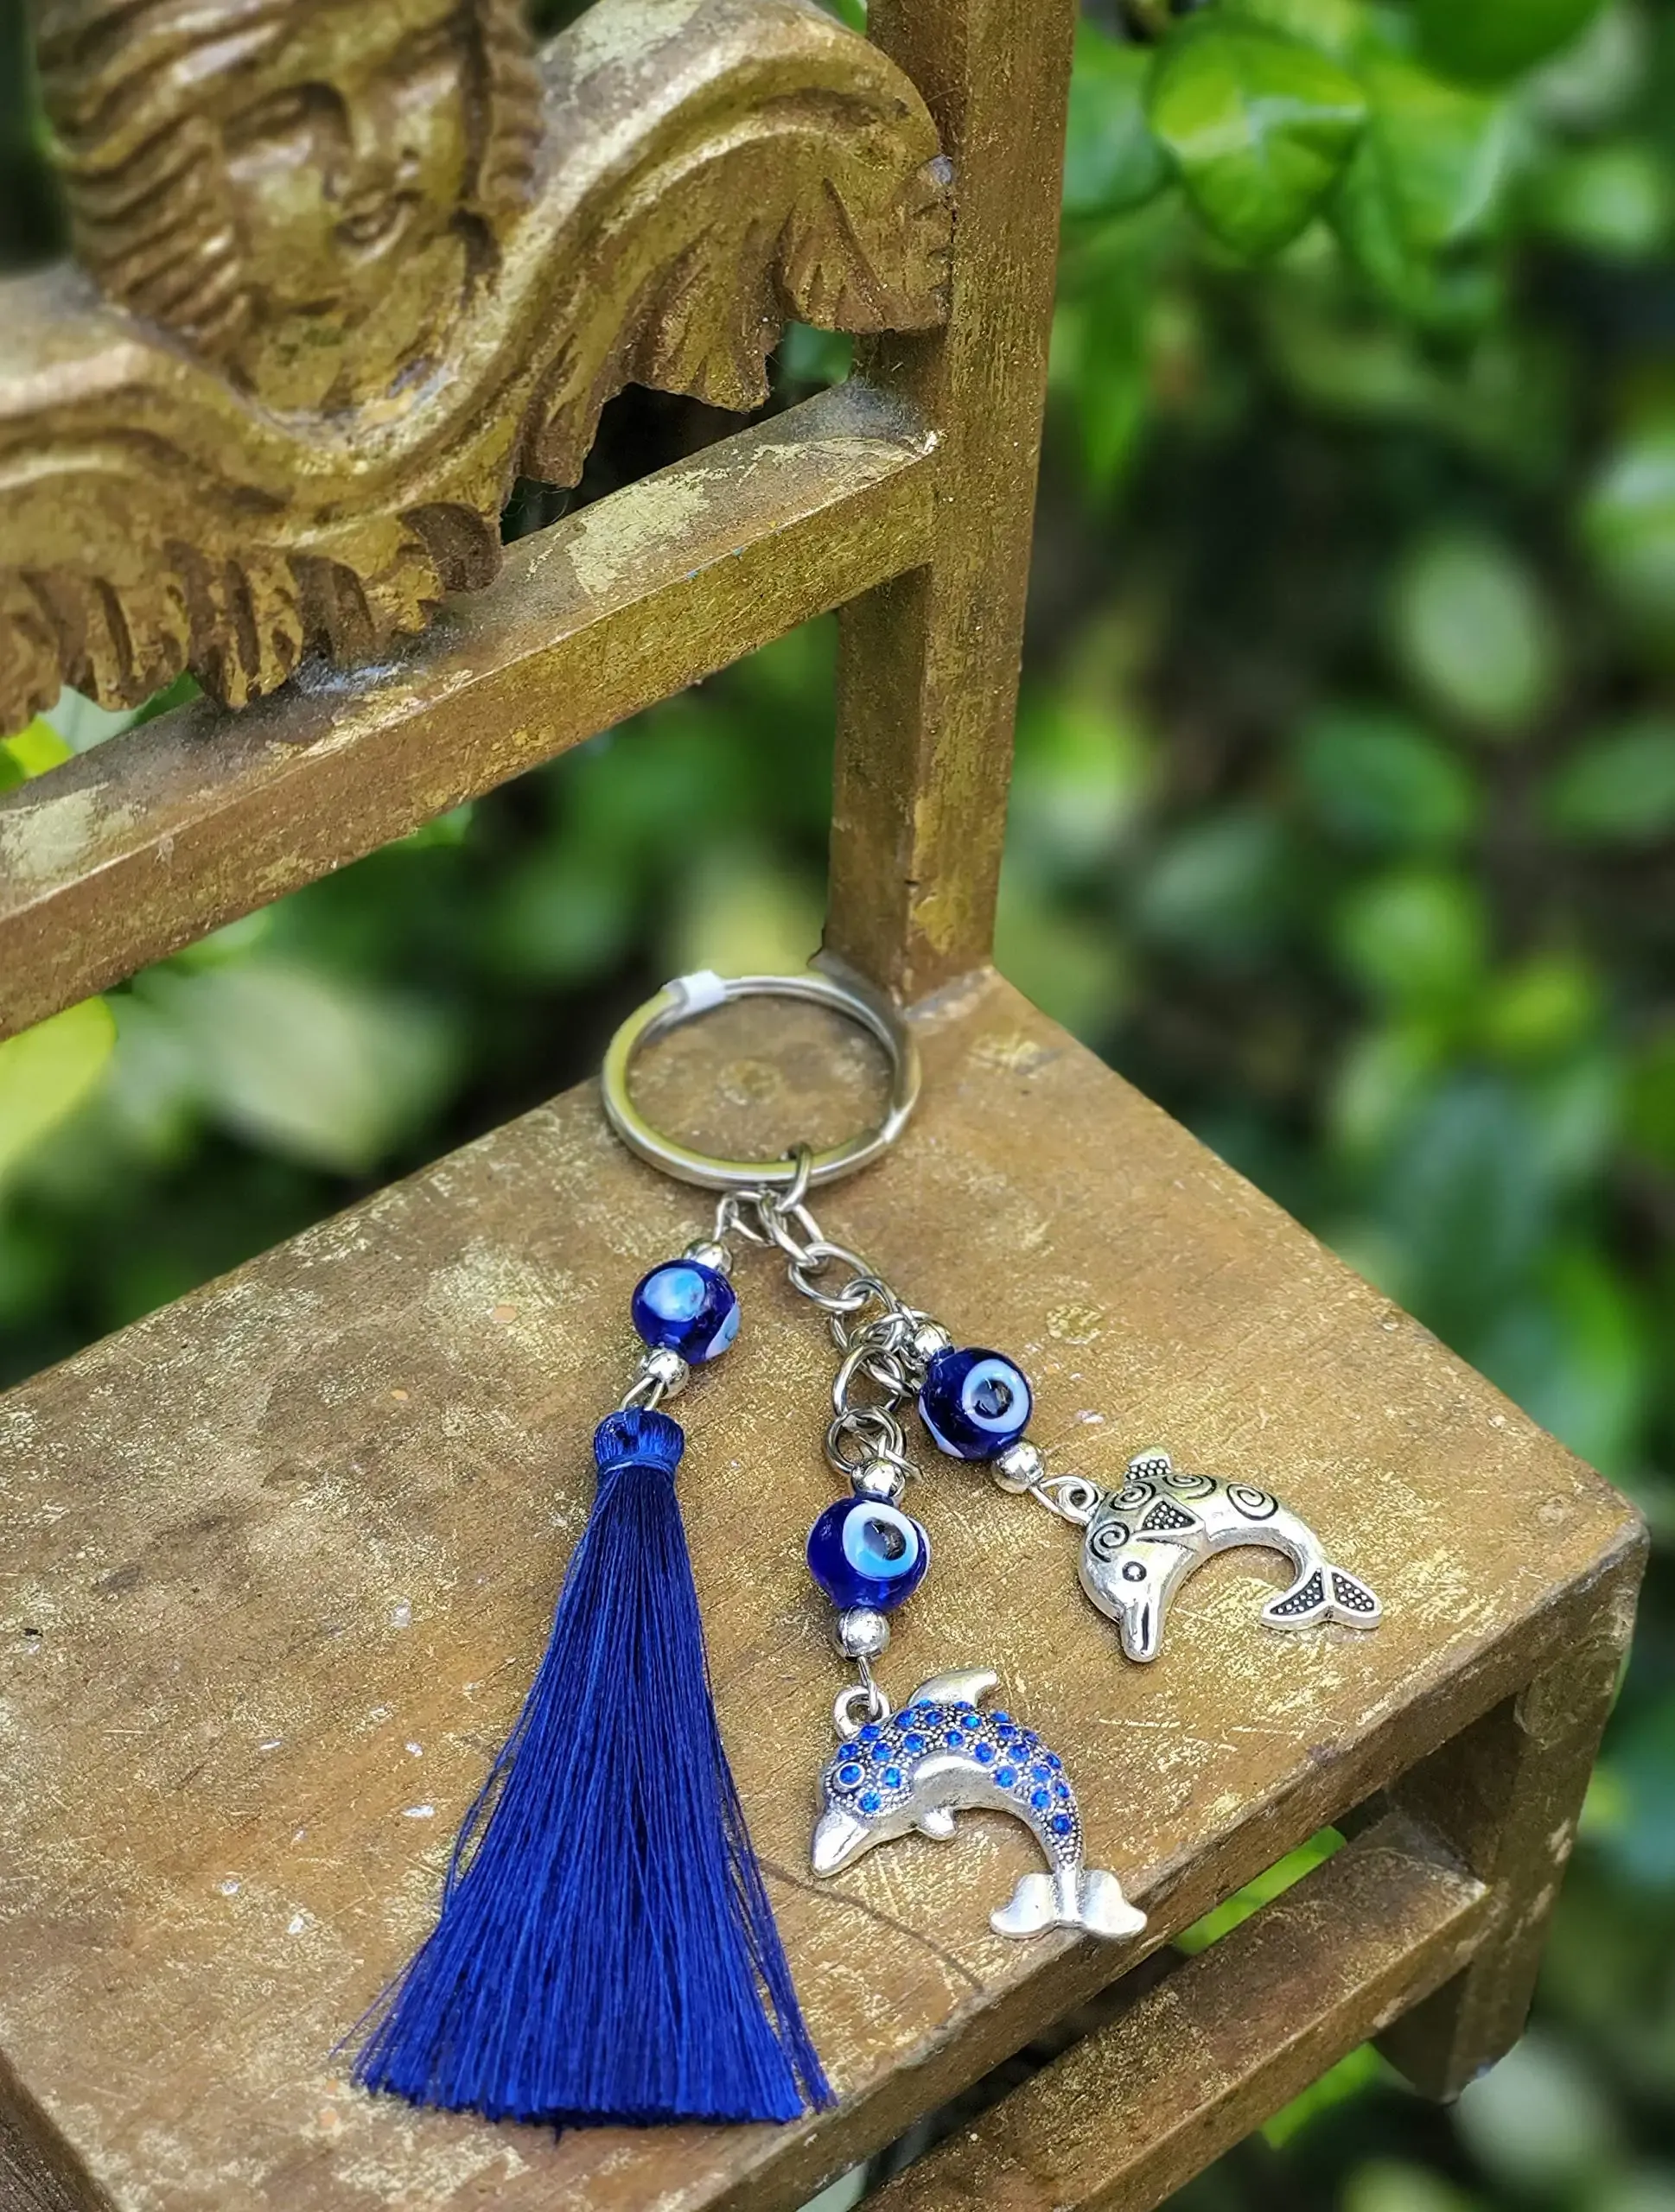 3ml 2 silver  and blue tassel lucky keychain w/3 lucky evil eyes sign of protection intelligence compassion home bags car rear view mirror hanging accessories 2 x 5